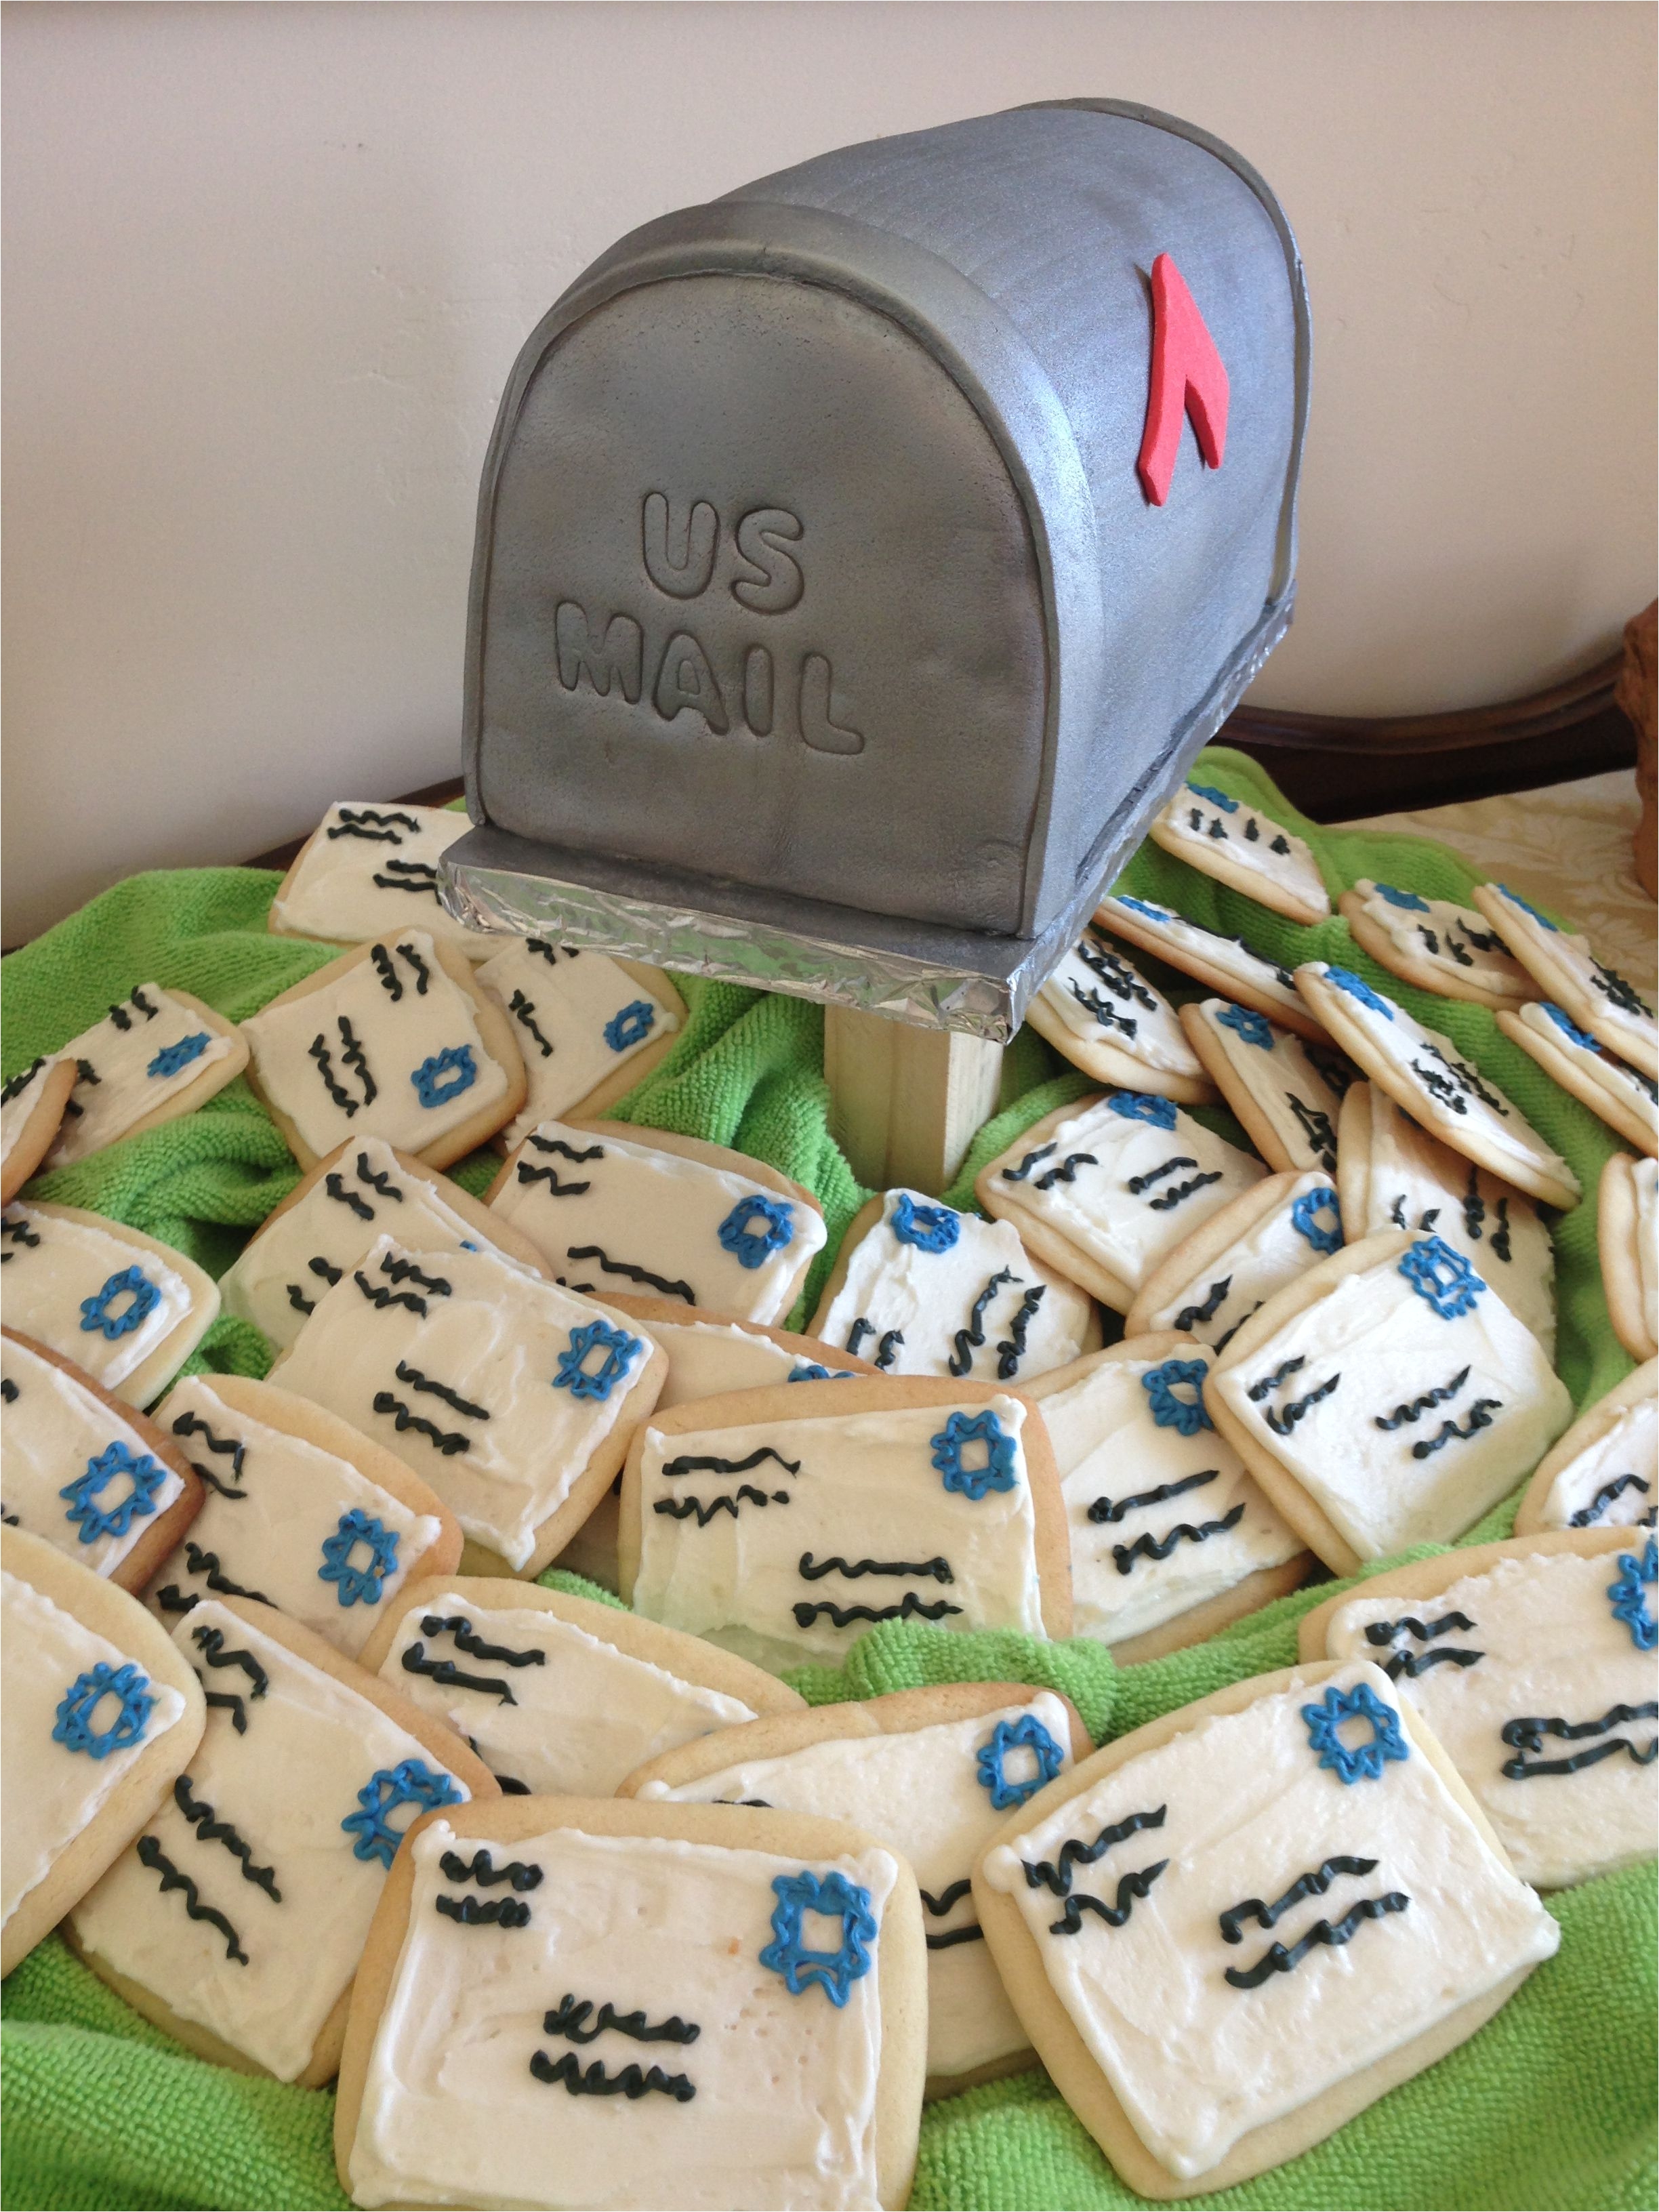 dads post office retirement cake and cookies used spray color to make it silver